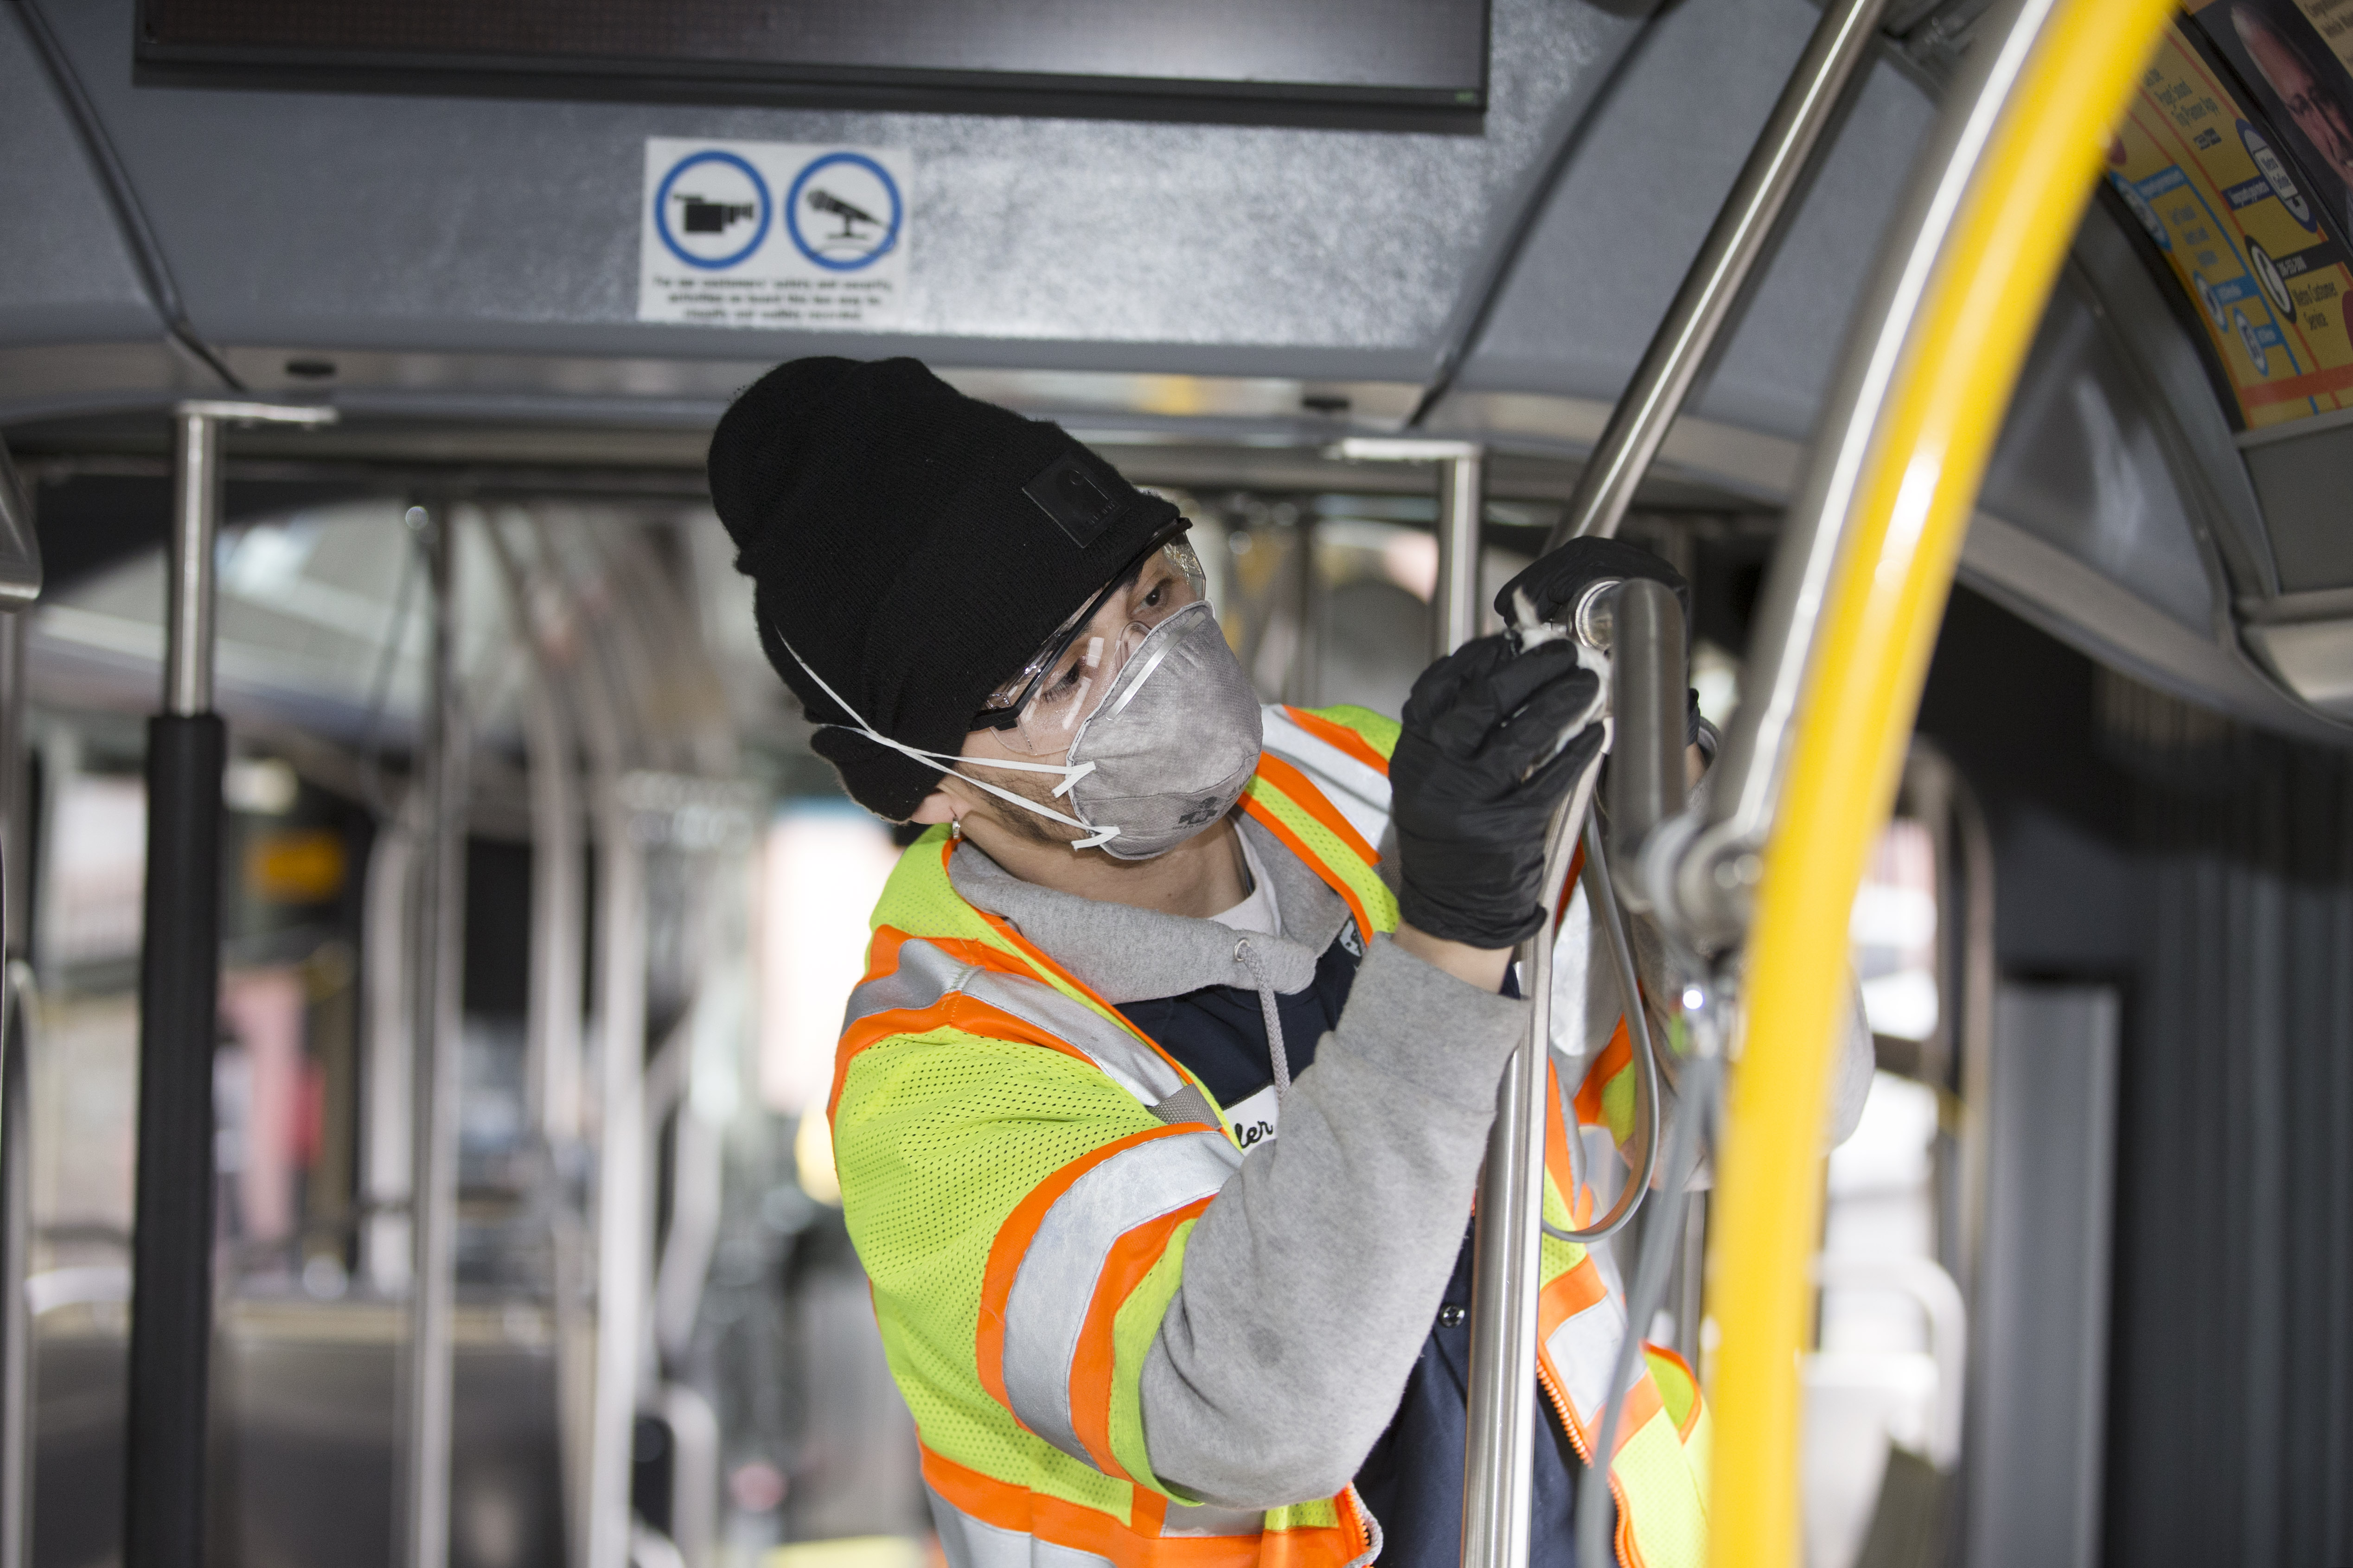 SEATTLE, WA - MARCH 03: A utility service worker deep cleans a bus as part of its usual cleaning routine at the King County Metro Atlantic/Central operating base on March 3, 2020 in Seattle, Washington. (Photo by Karen Ducey/Getty Images)